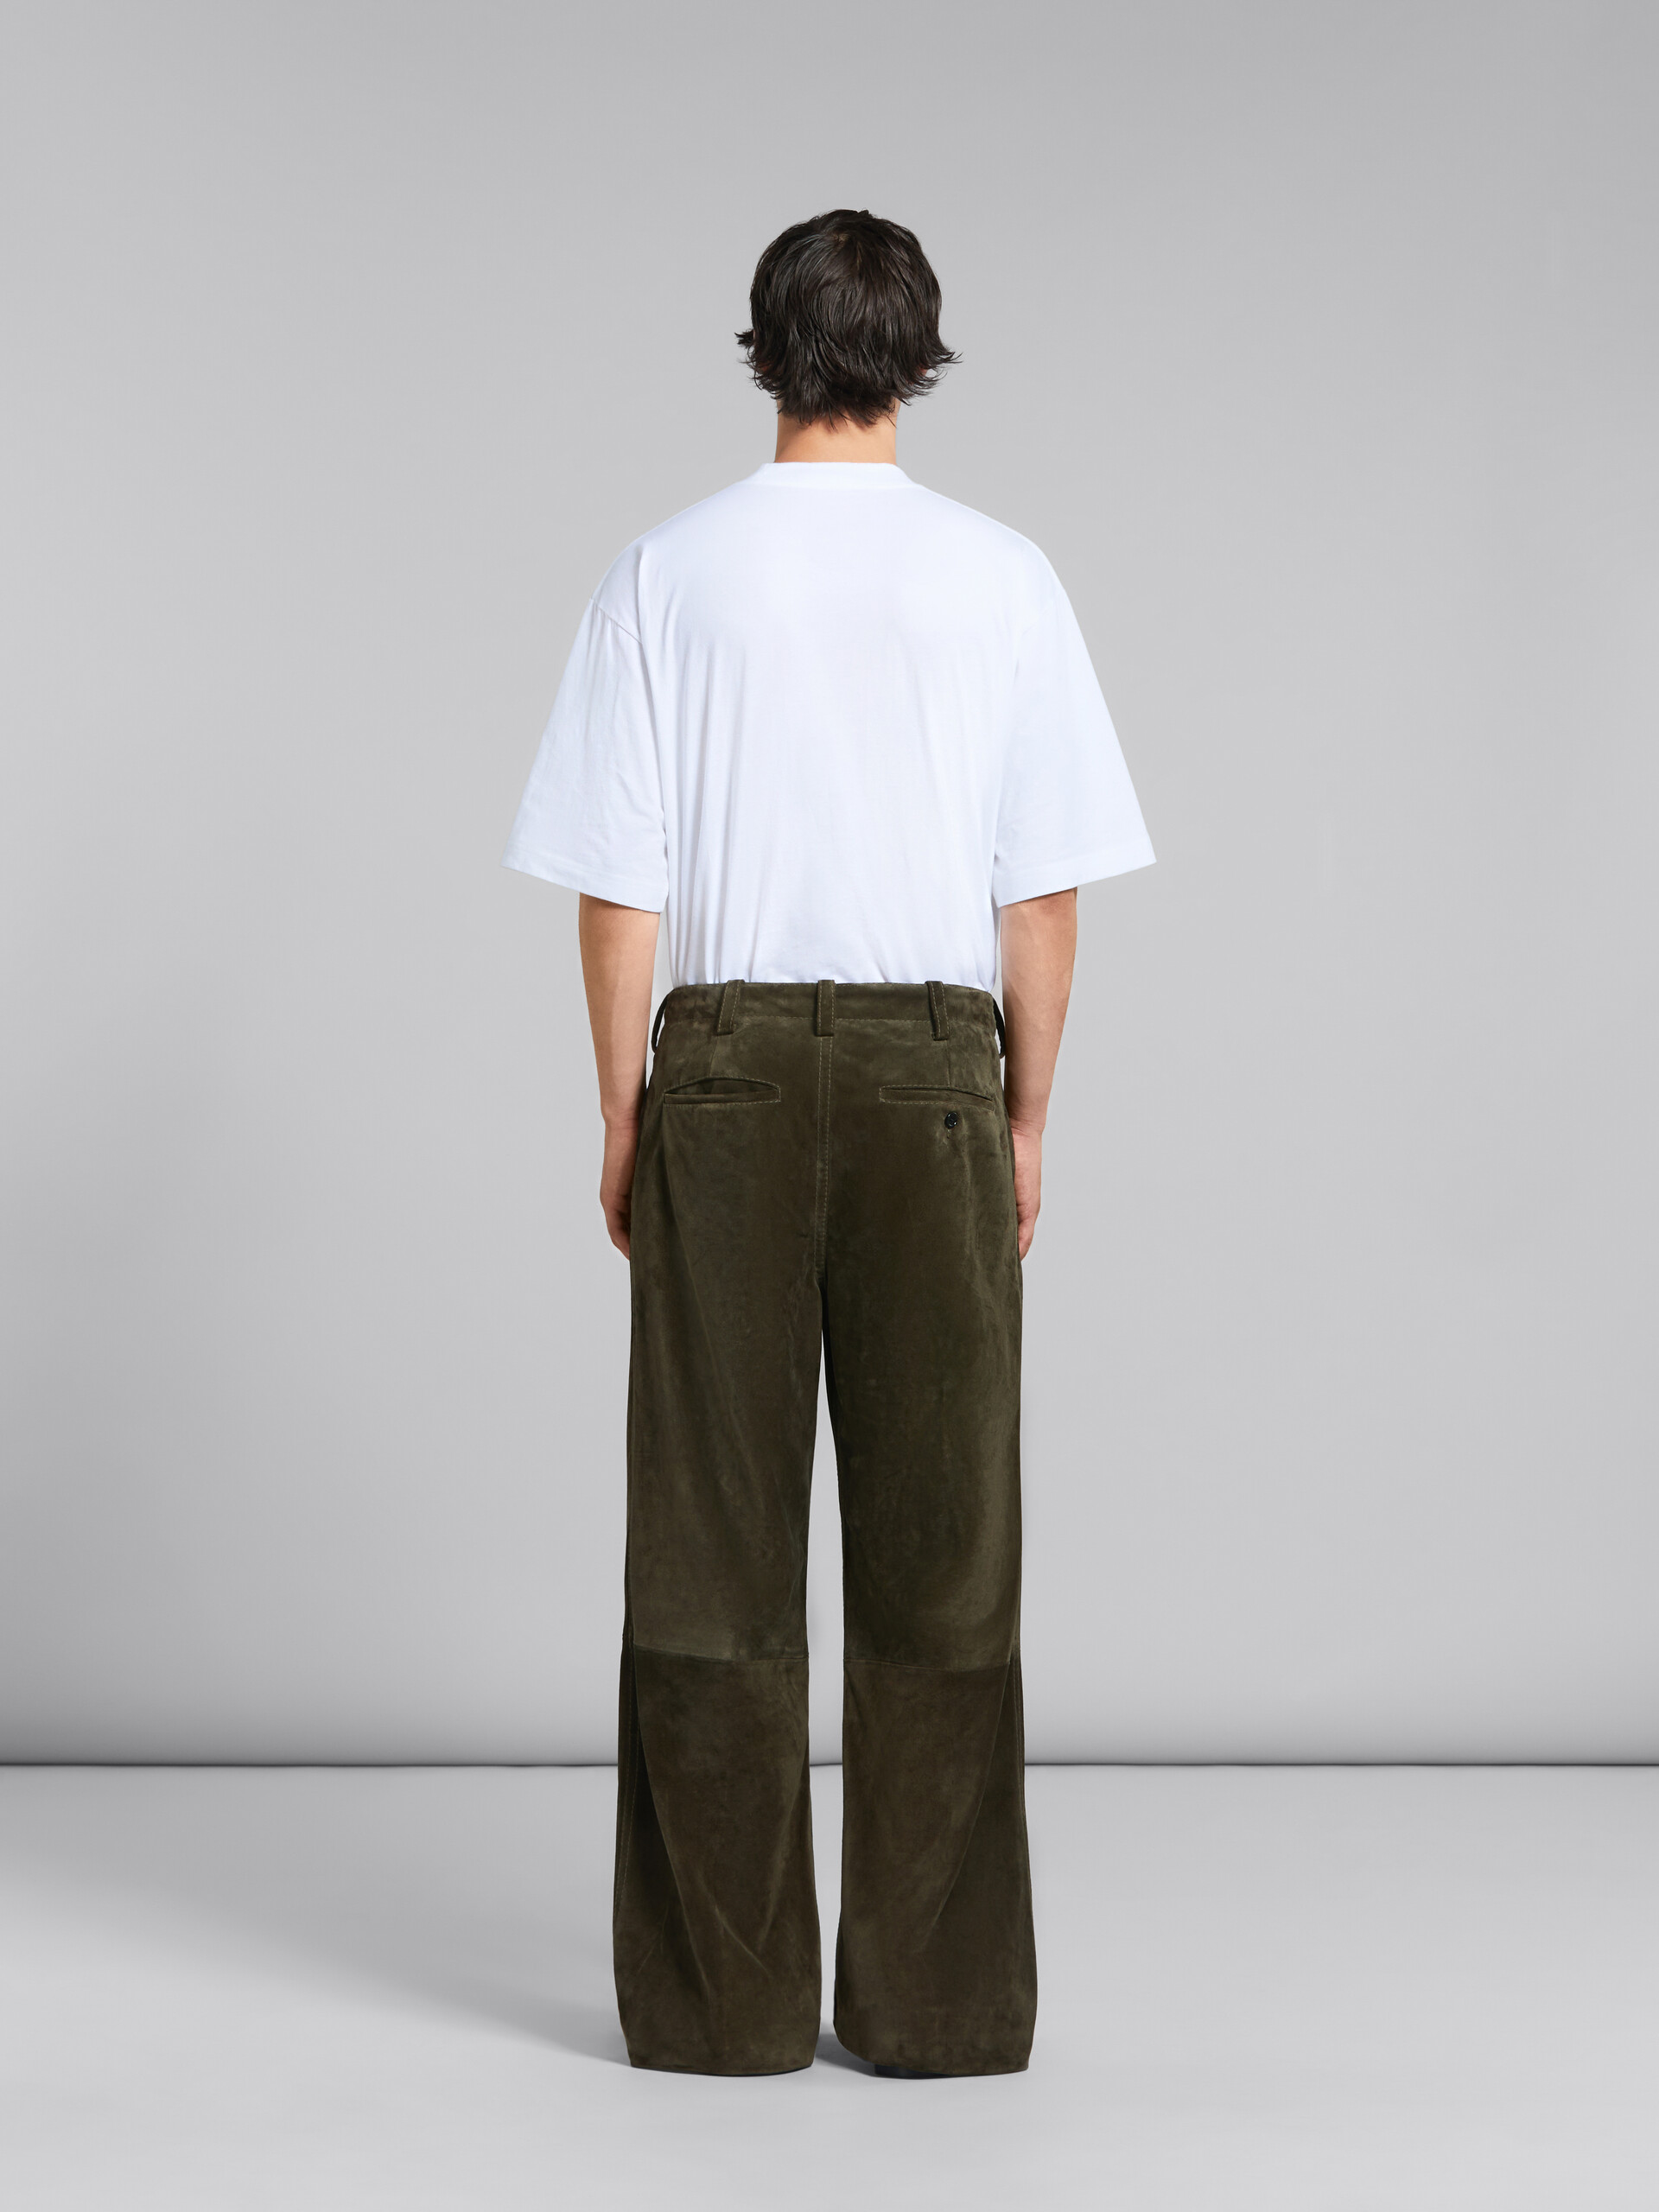 Green compact suede trousers - Pants - Image 3